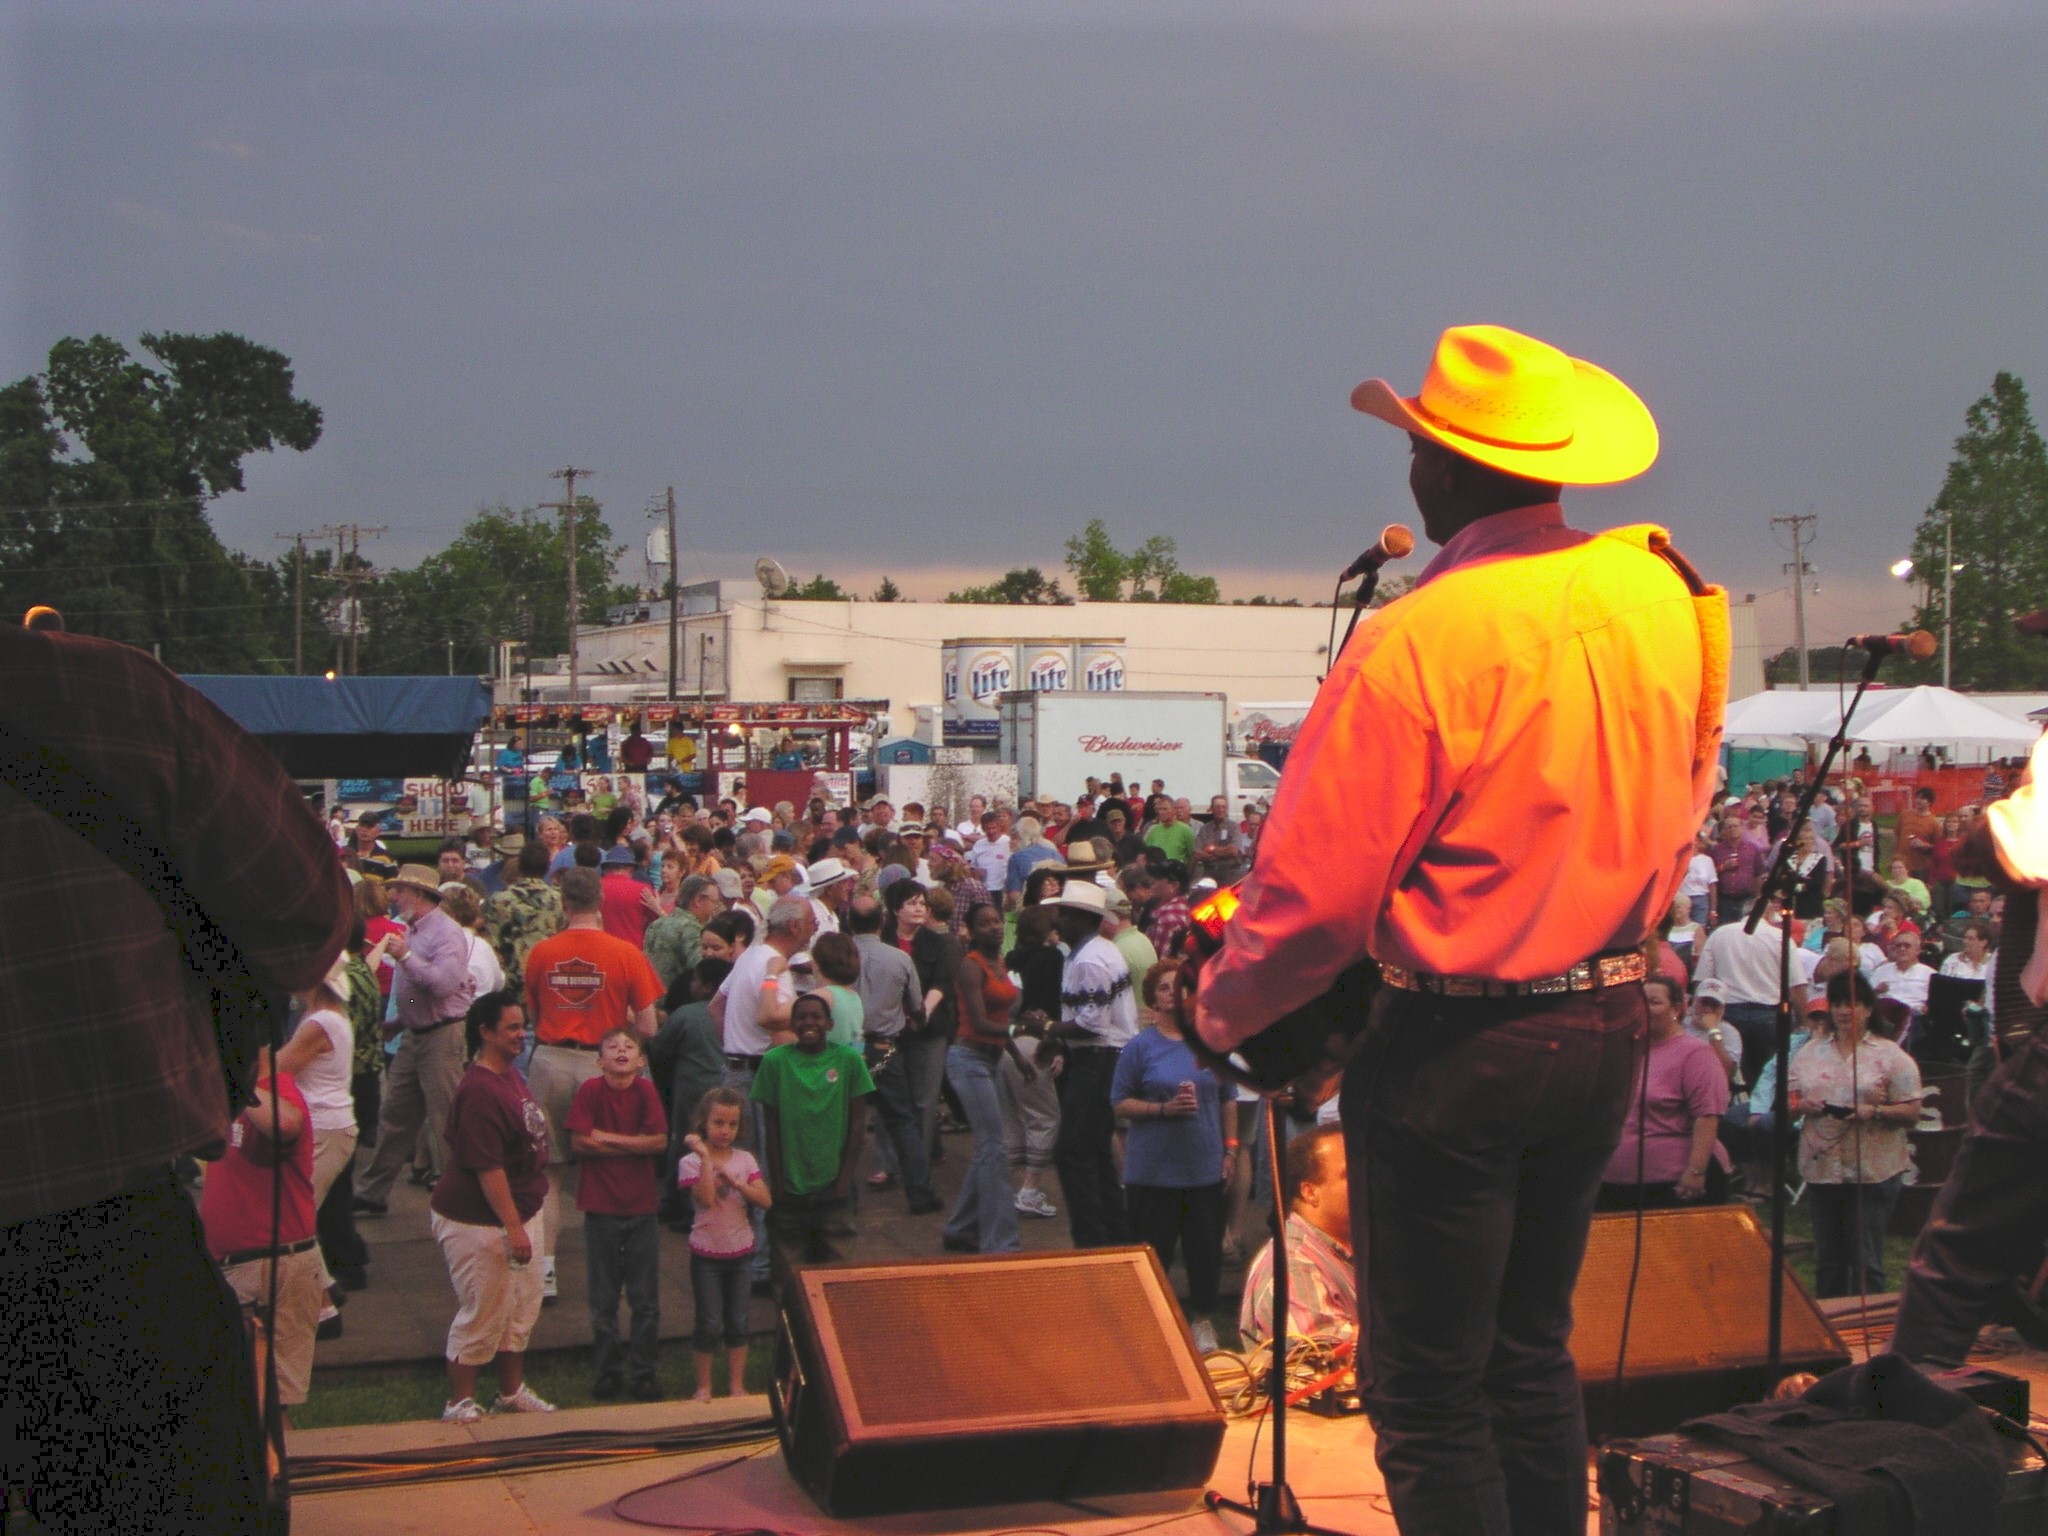 Man in yellow shirt and hat addressing a crowd